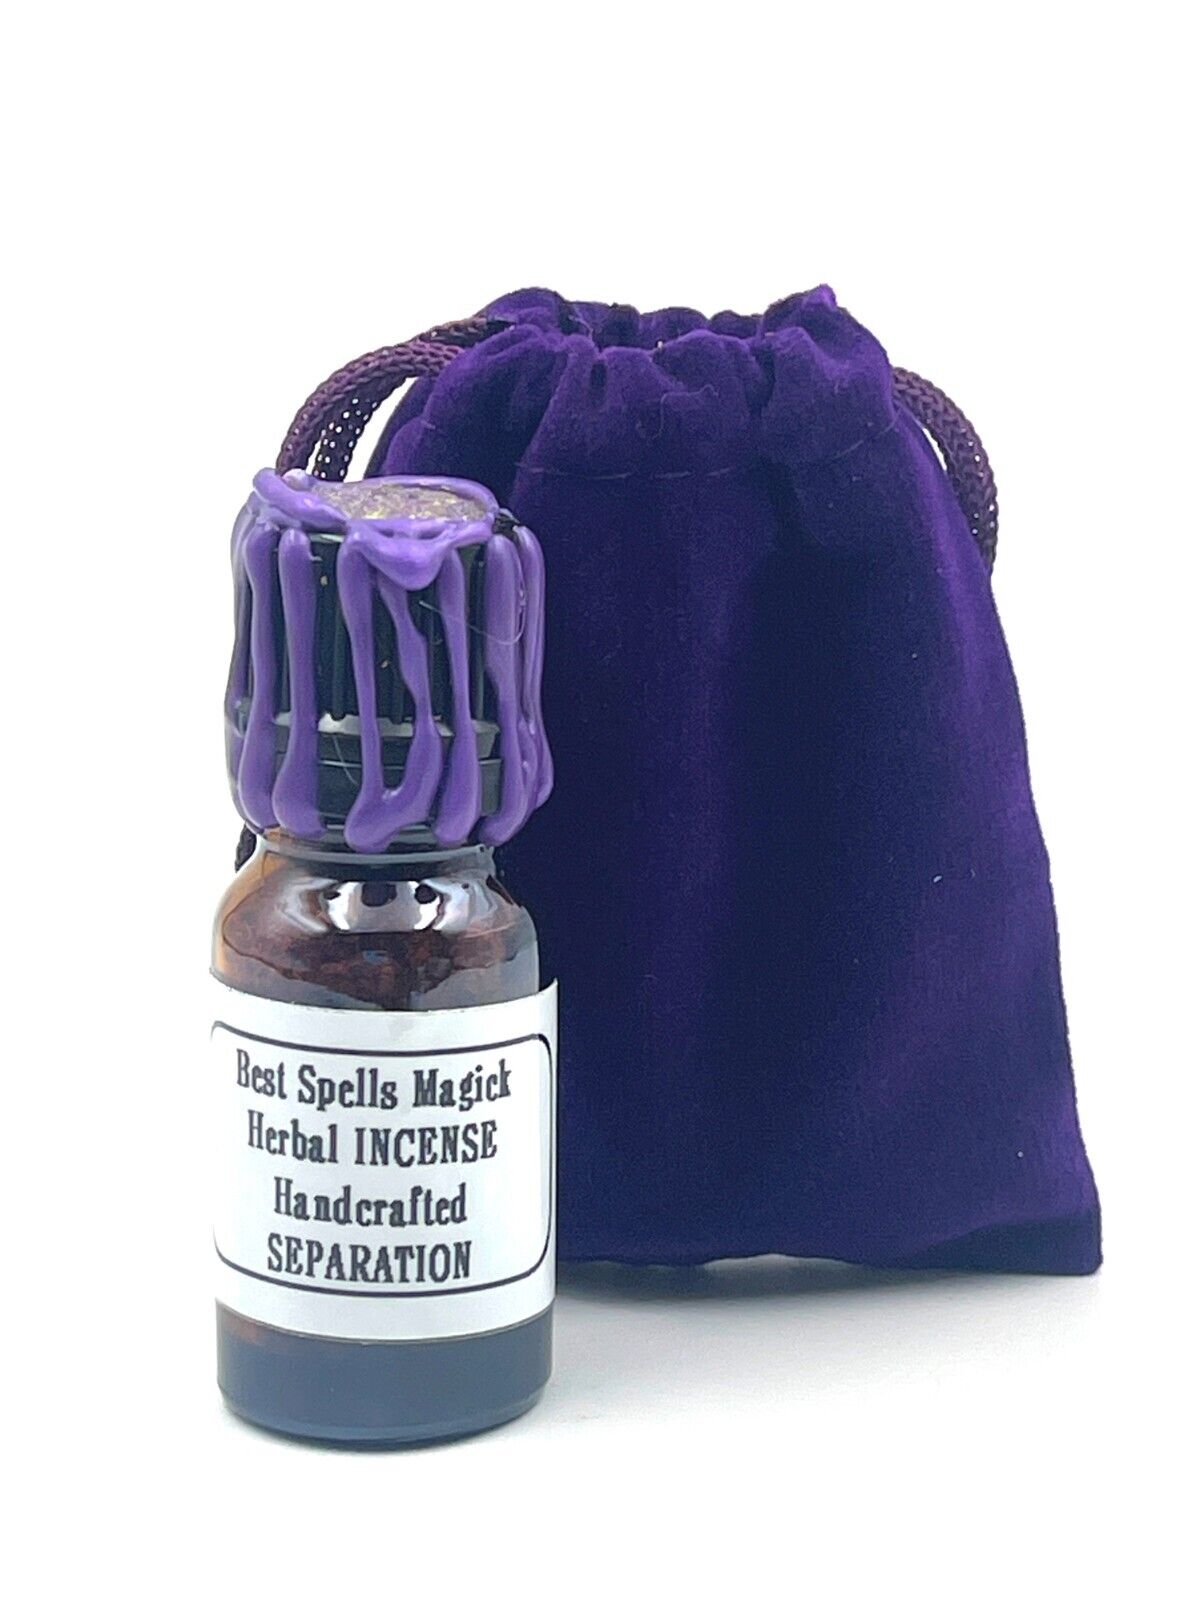 SEPARATION Incense Powder/Traditional Rootwork/Wicca